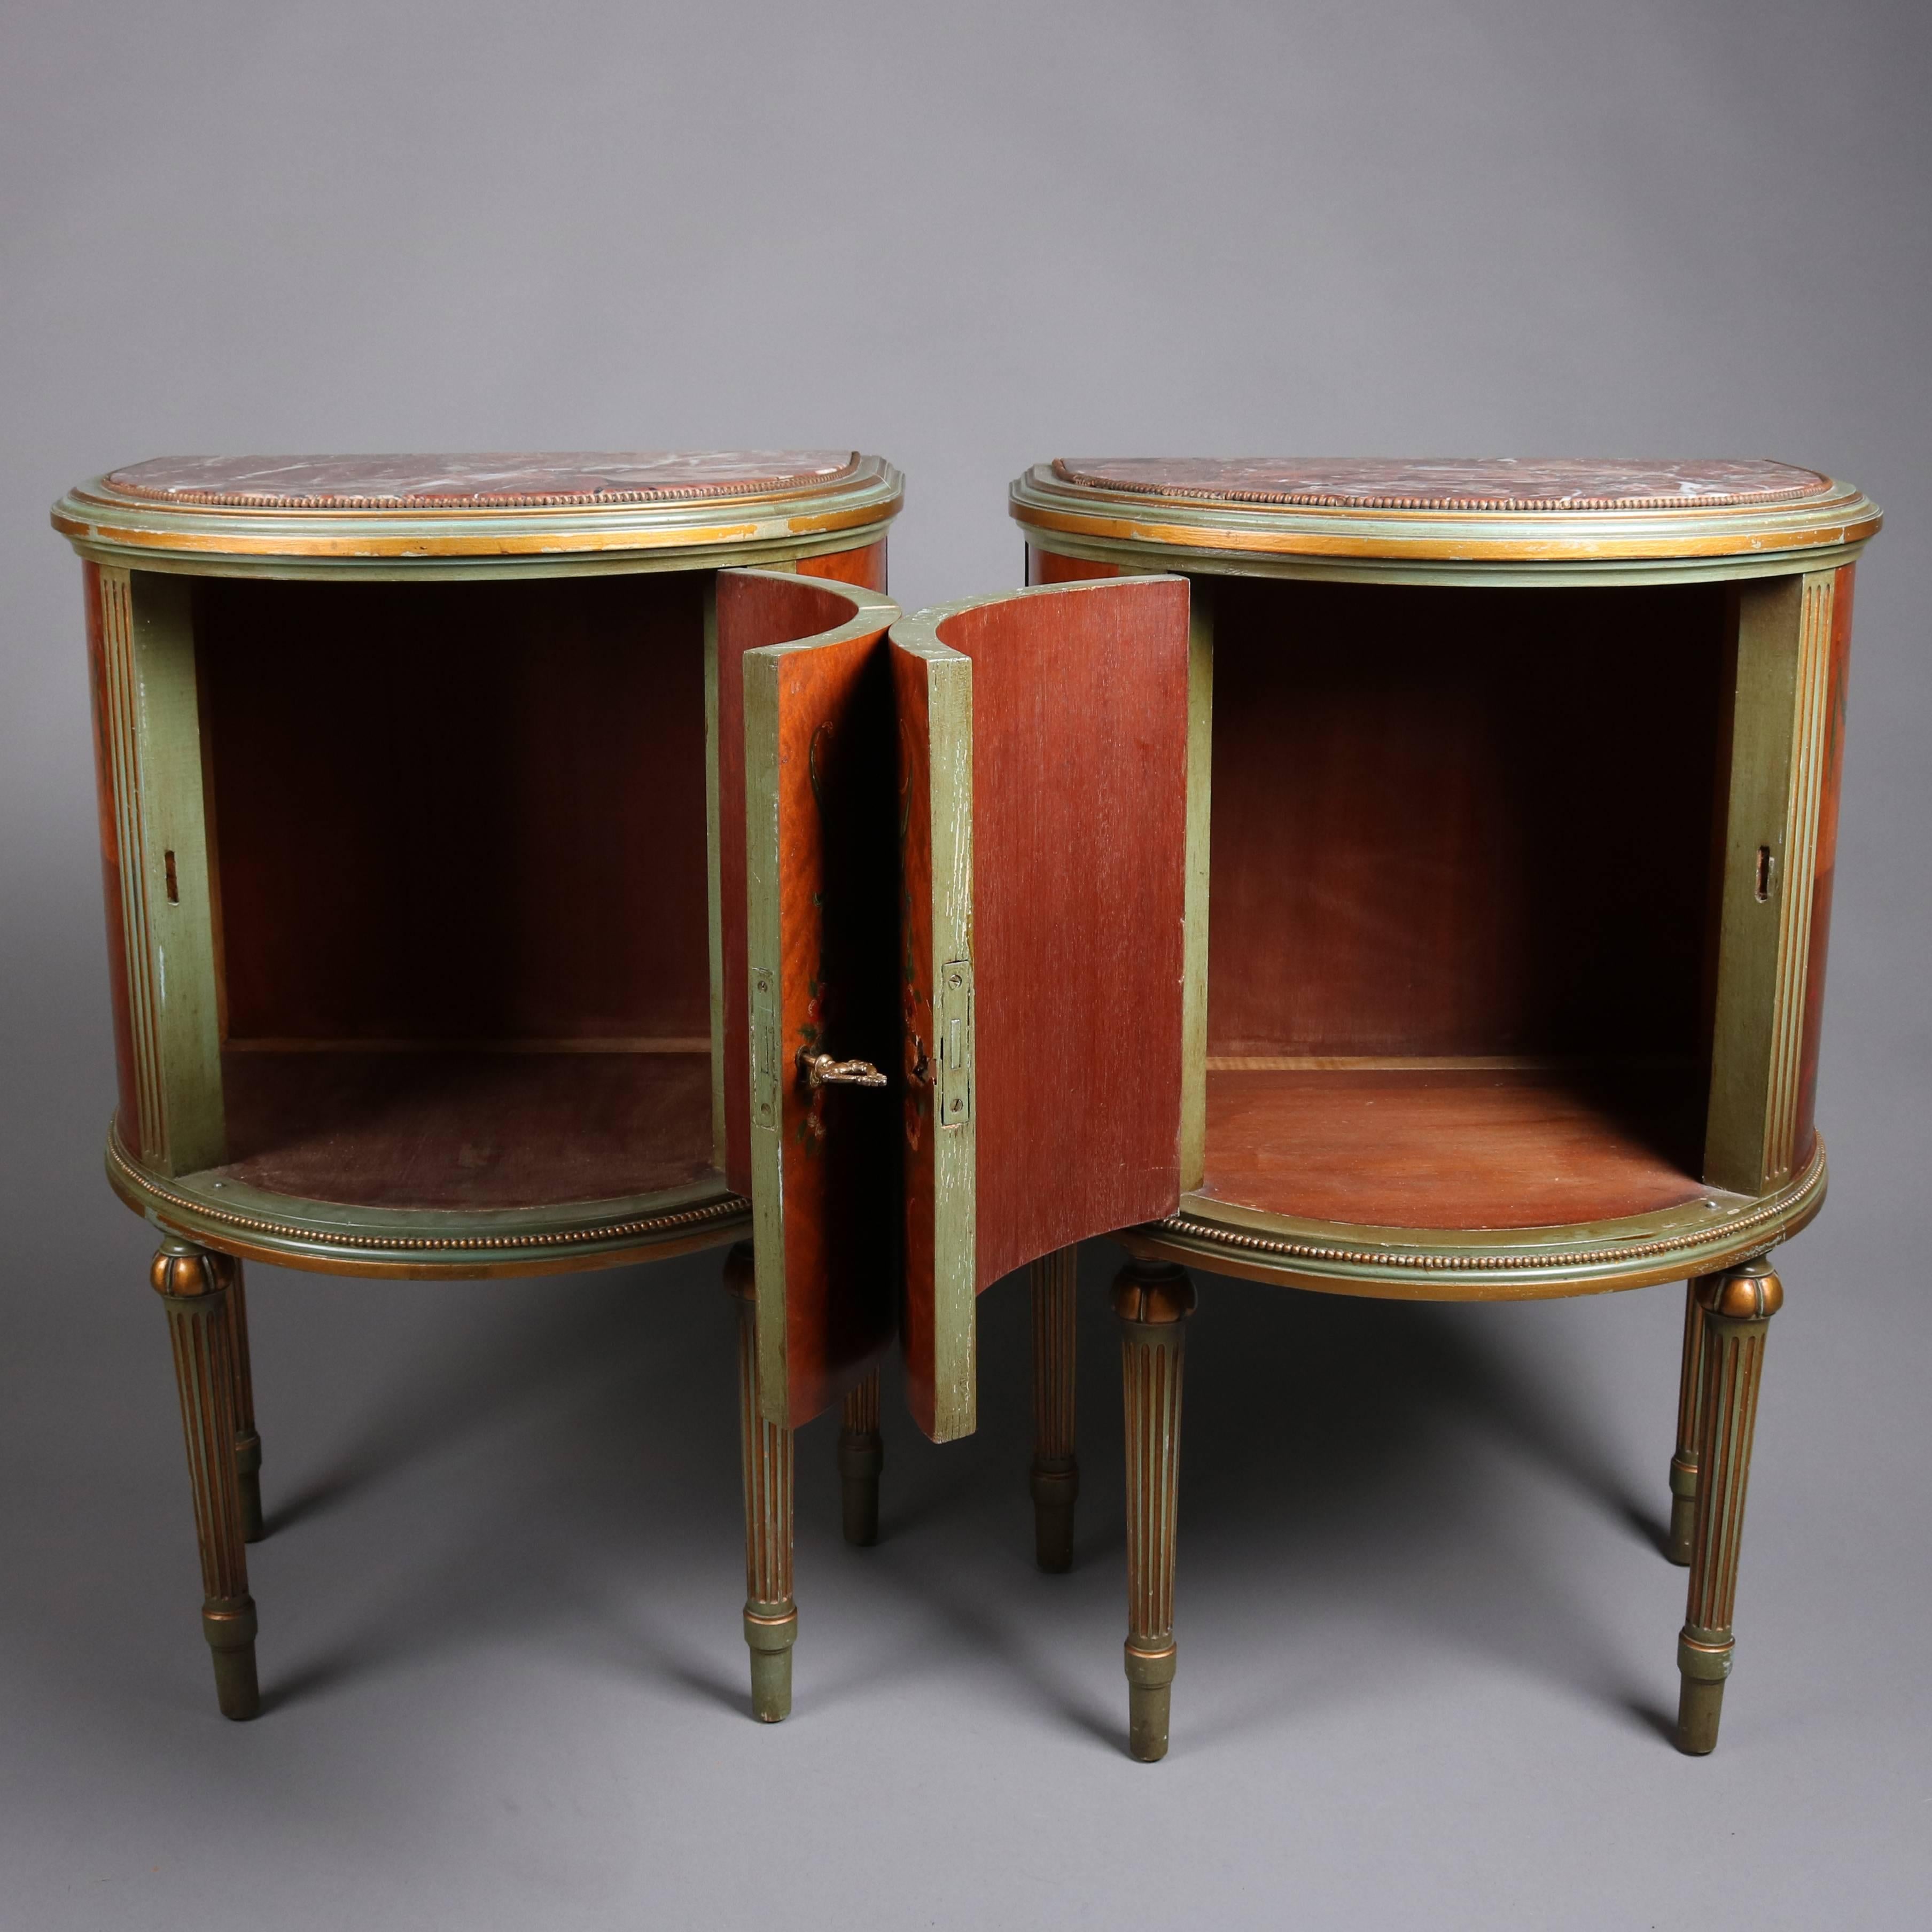 Pair of antique Adam style neoclassical satinwood high chest feature demilune form with bookmatched panel doors with hand-painted central floral spray bordered by foliate, ribbon and scroll garland, gilt decorated reeded trim, and seated on gilt